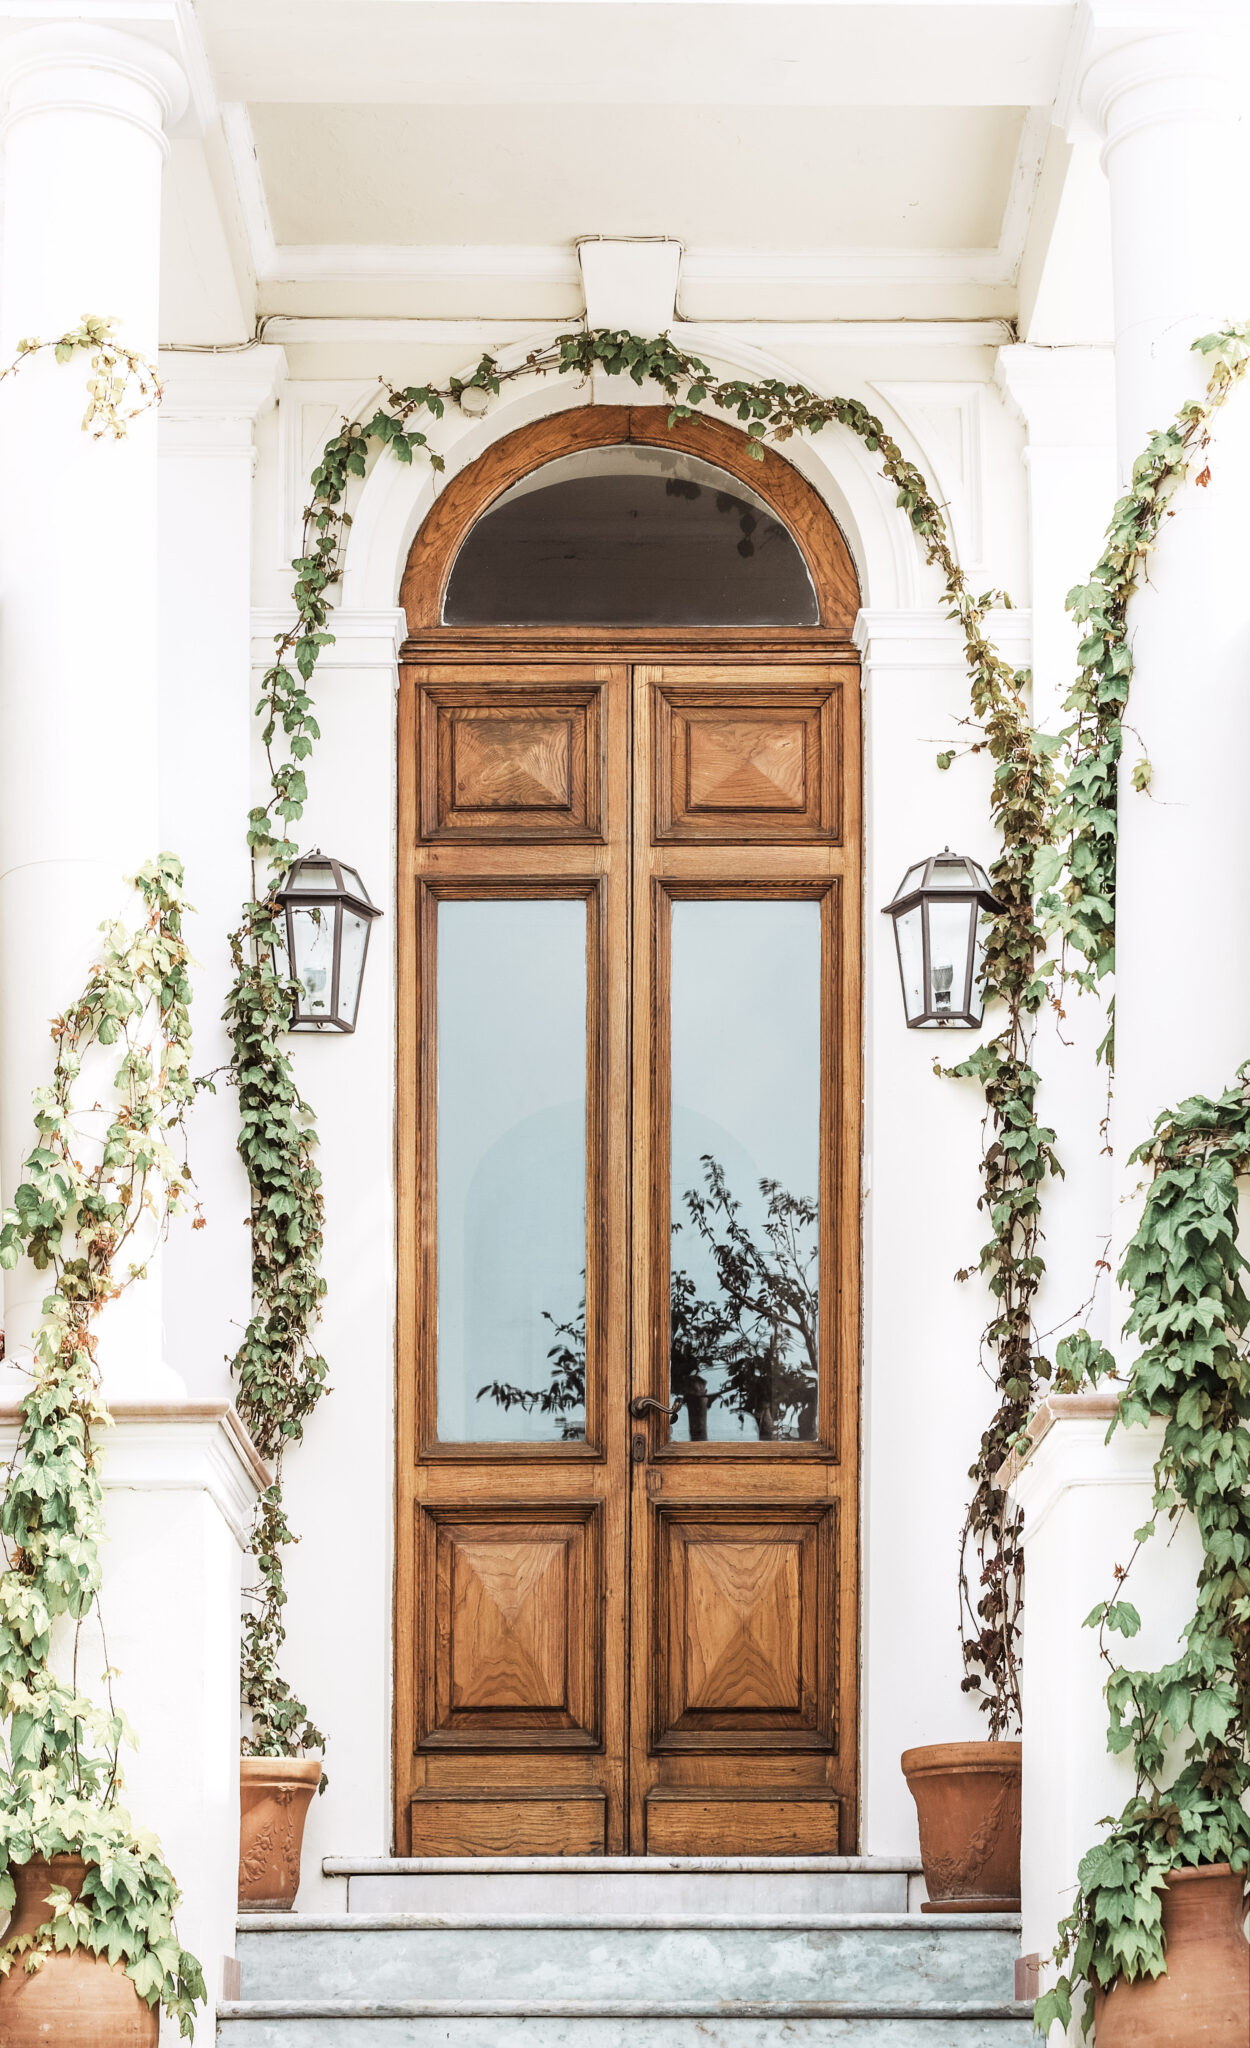 Update Your Home’s Exterior In These Simple Ways